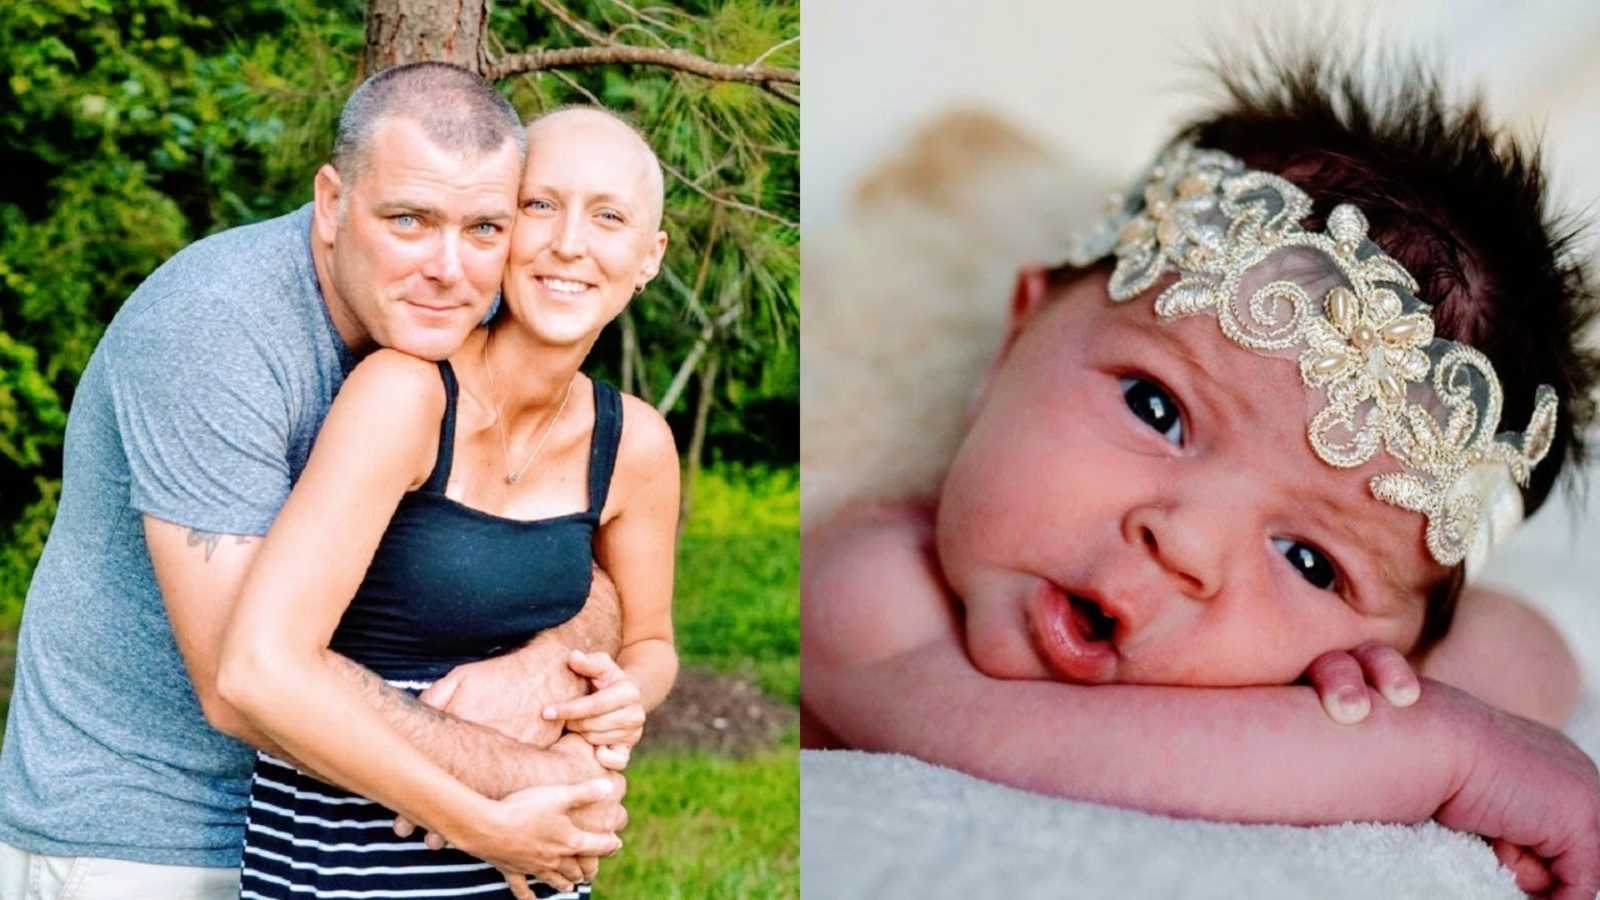 A husband hugs his wife who had cancer and a baby girl lies on her stomach